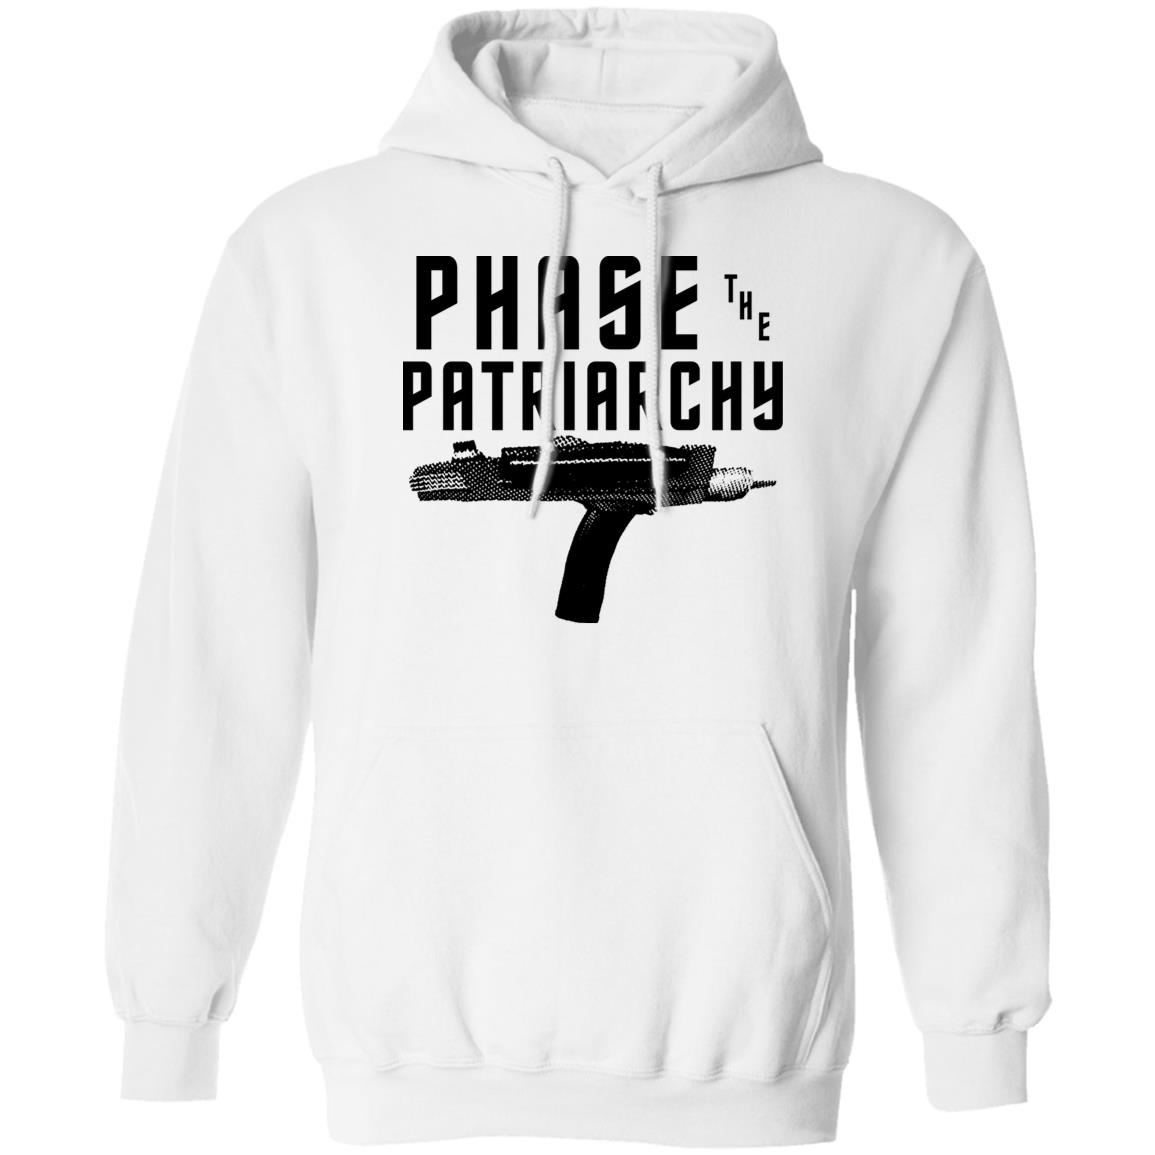 Phase The Patriarchy Shirt Panetory – Graphic Design Apparel &Amp; Accessories Online